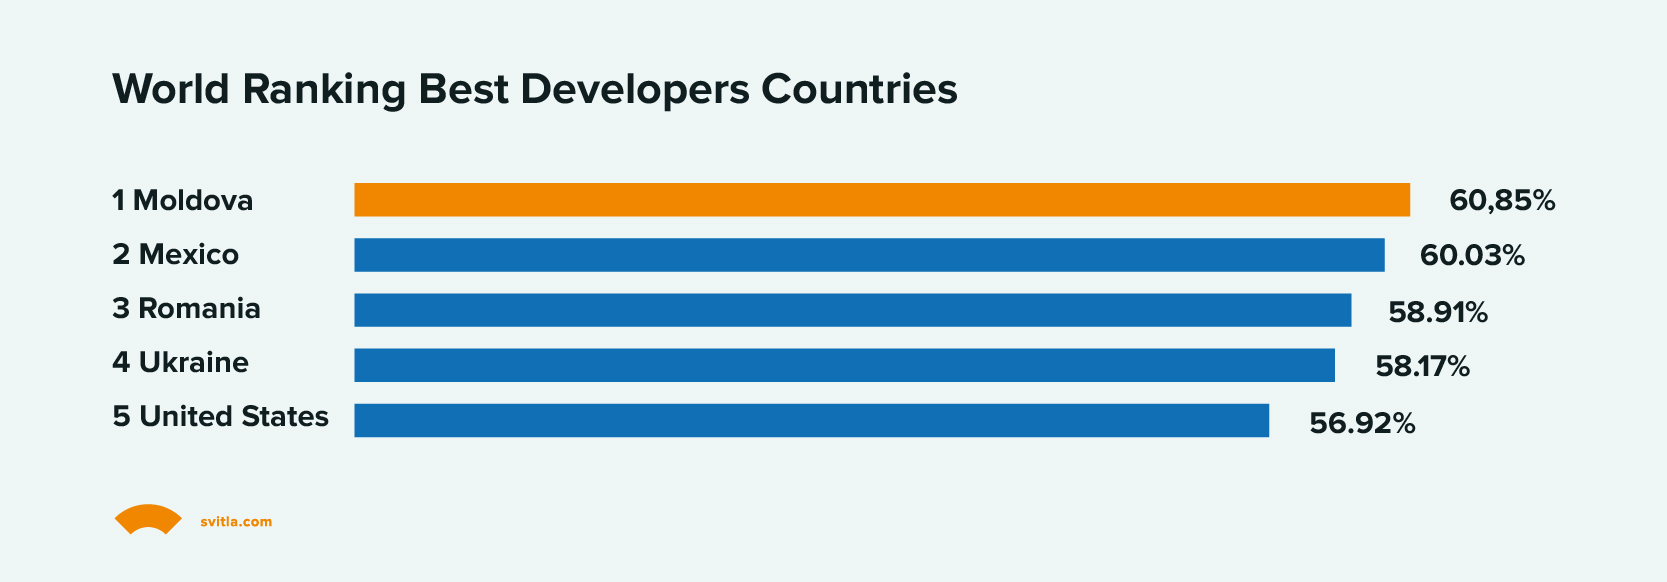 Word Ranking Best Developers Countries